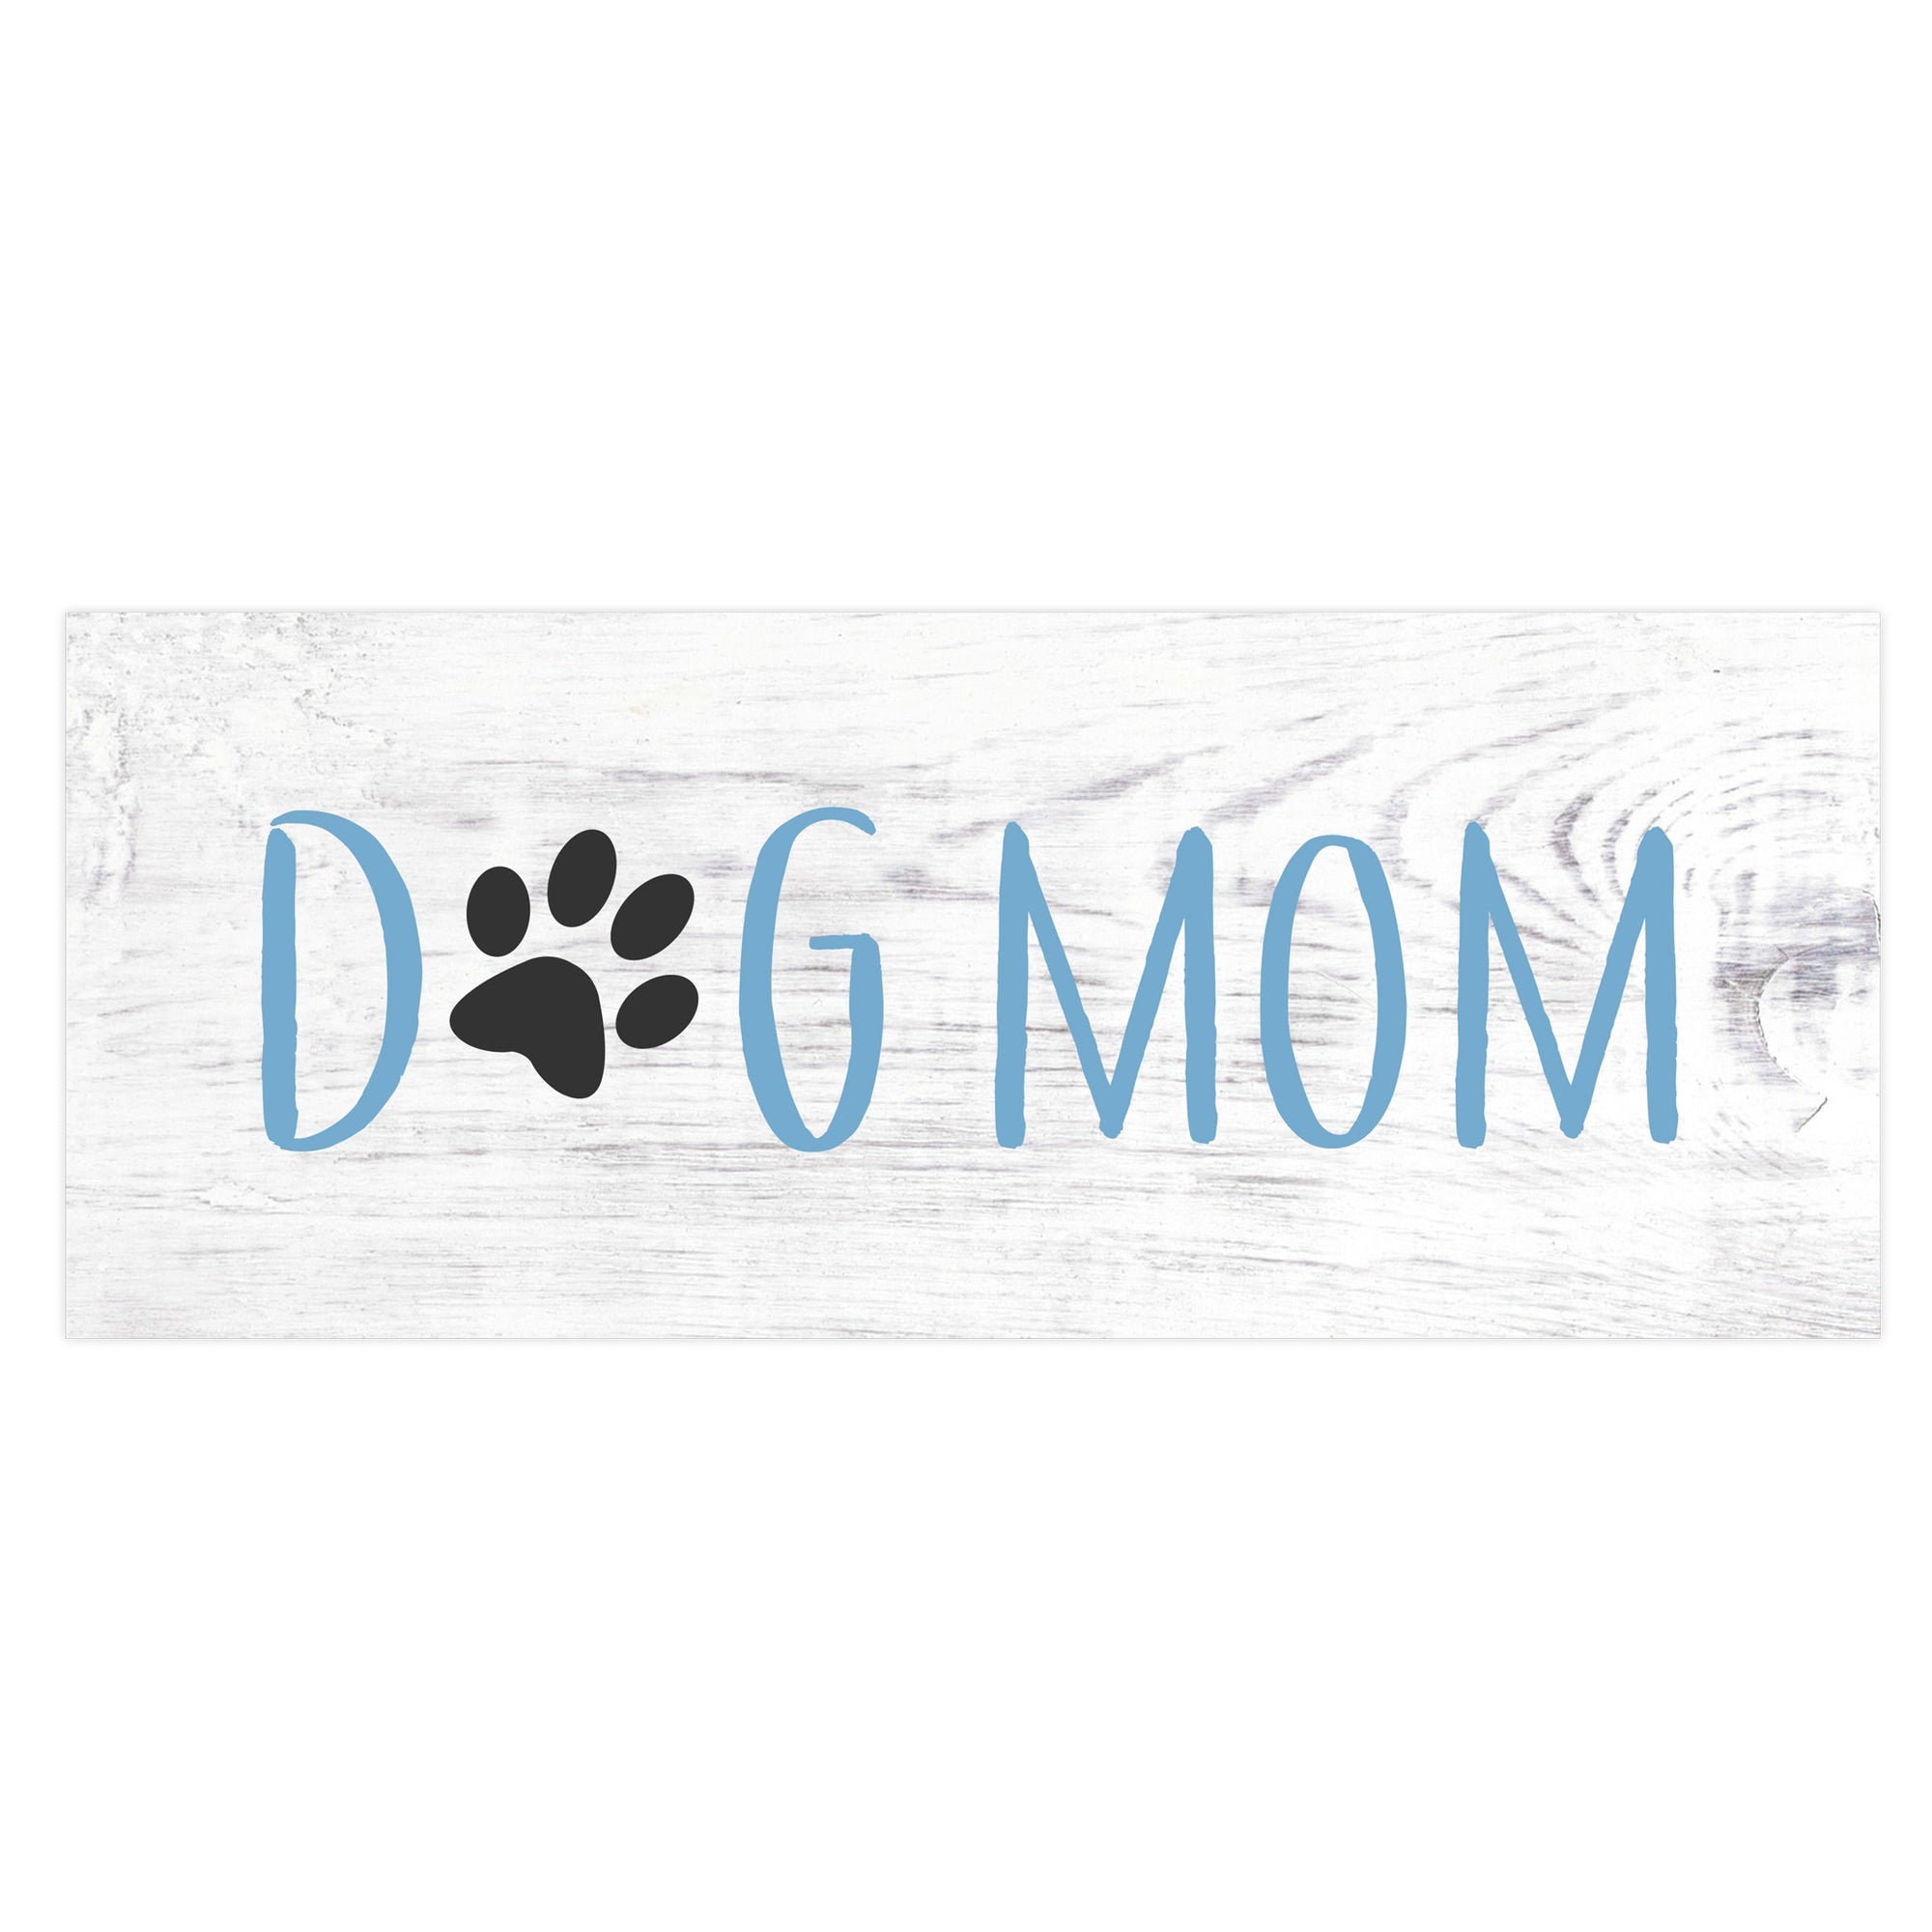 Wooden Tabletop Sign for Pet Lovers